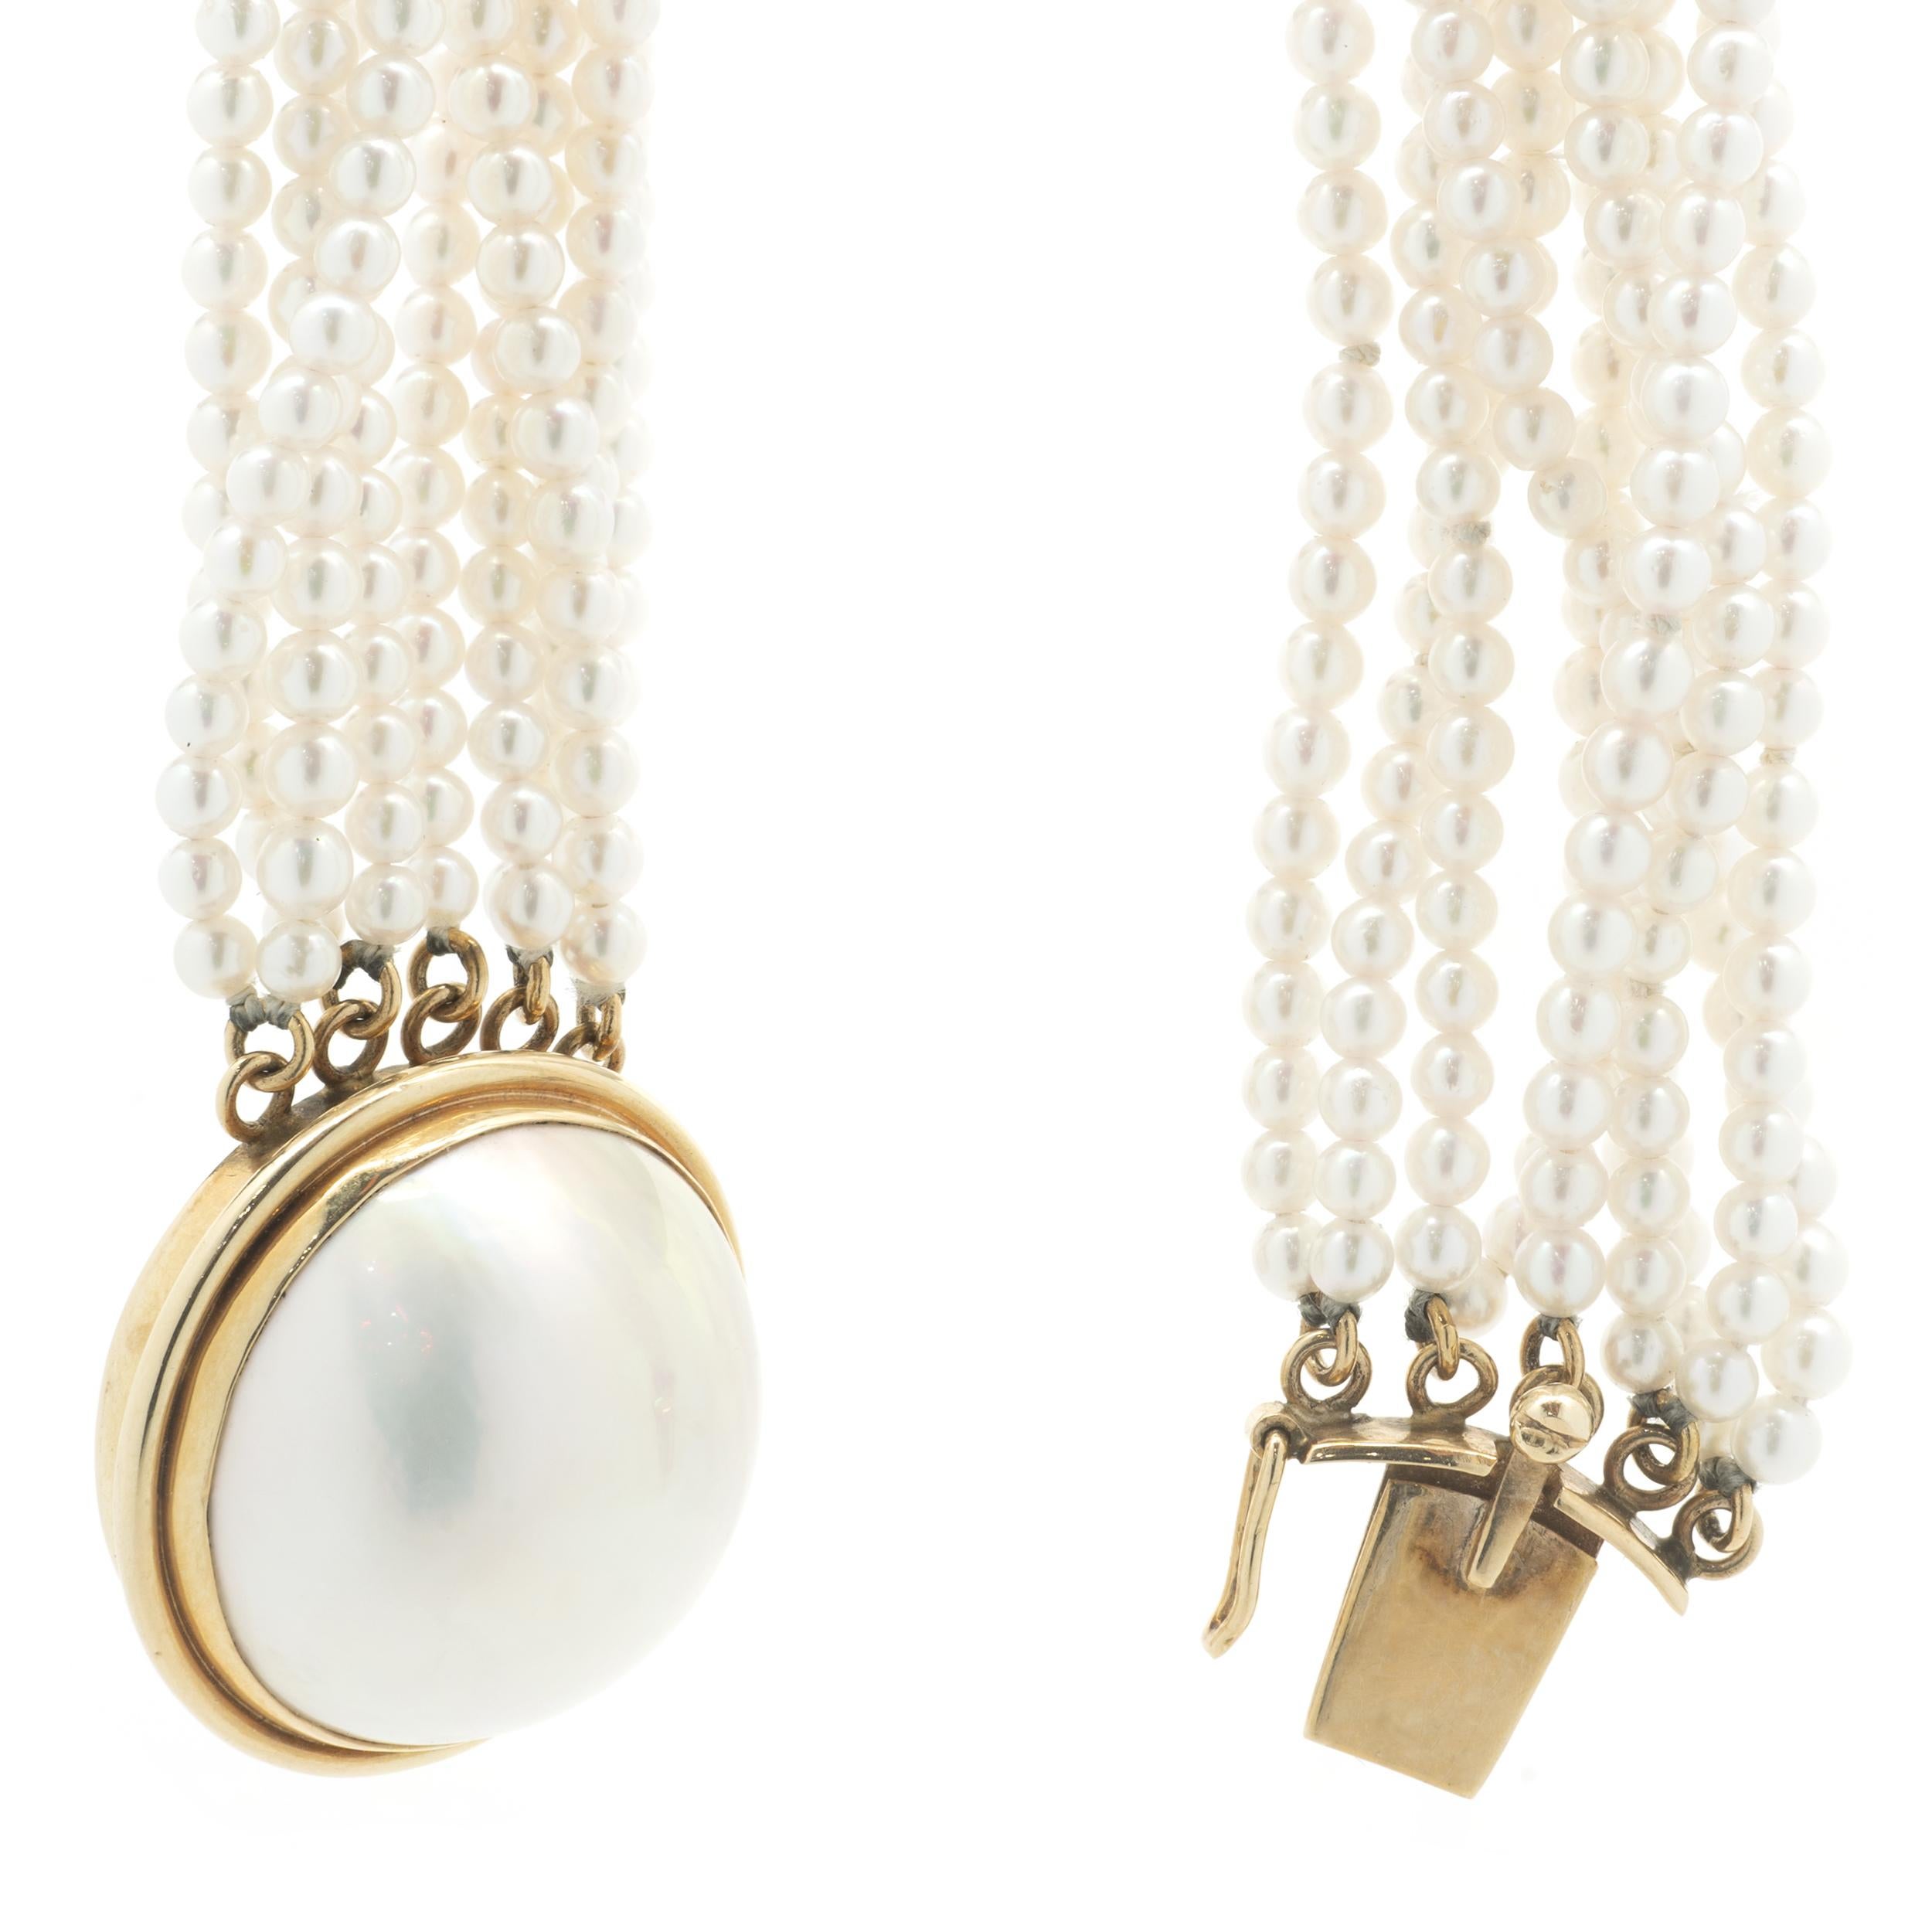 Designer: Custom
Material: 14K yellow gold
Pearl: 20mm Mabe pearl center, 2.5mm seed pearls
Dimensions: necklace measures 16-inches in length
Weight: 48.36 grams